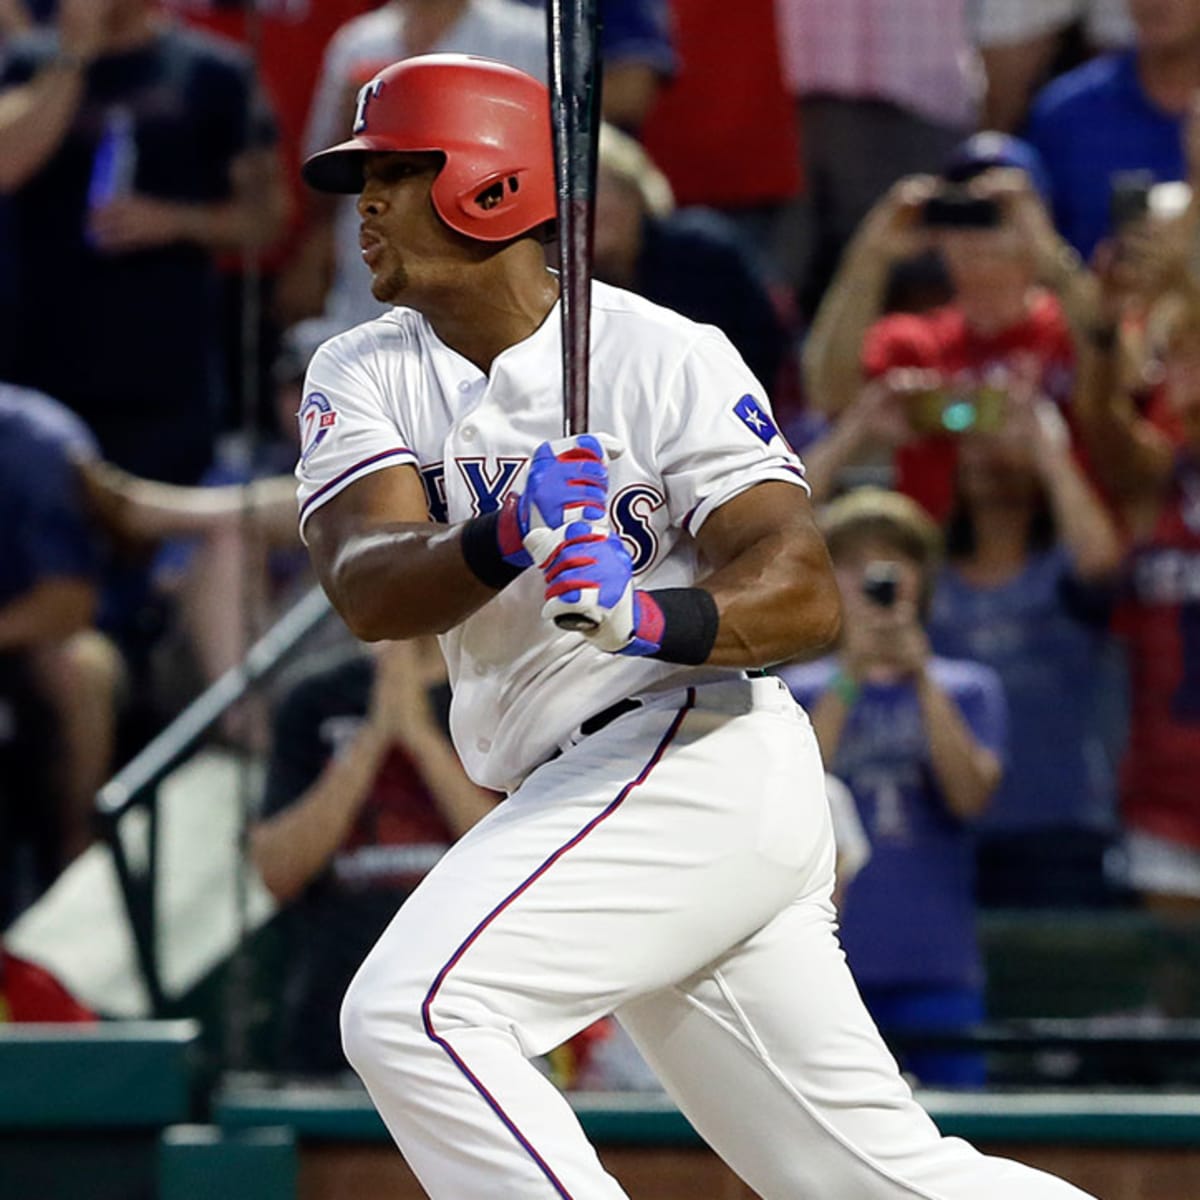 Adrian Beltre: All-time leader in MLB hits for Latin American players